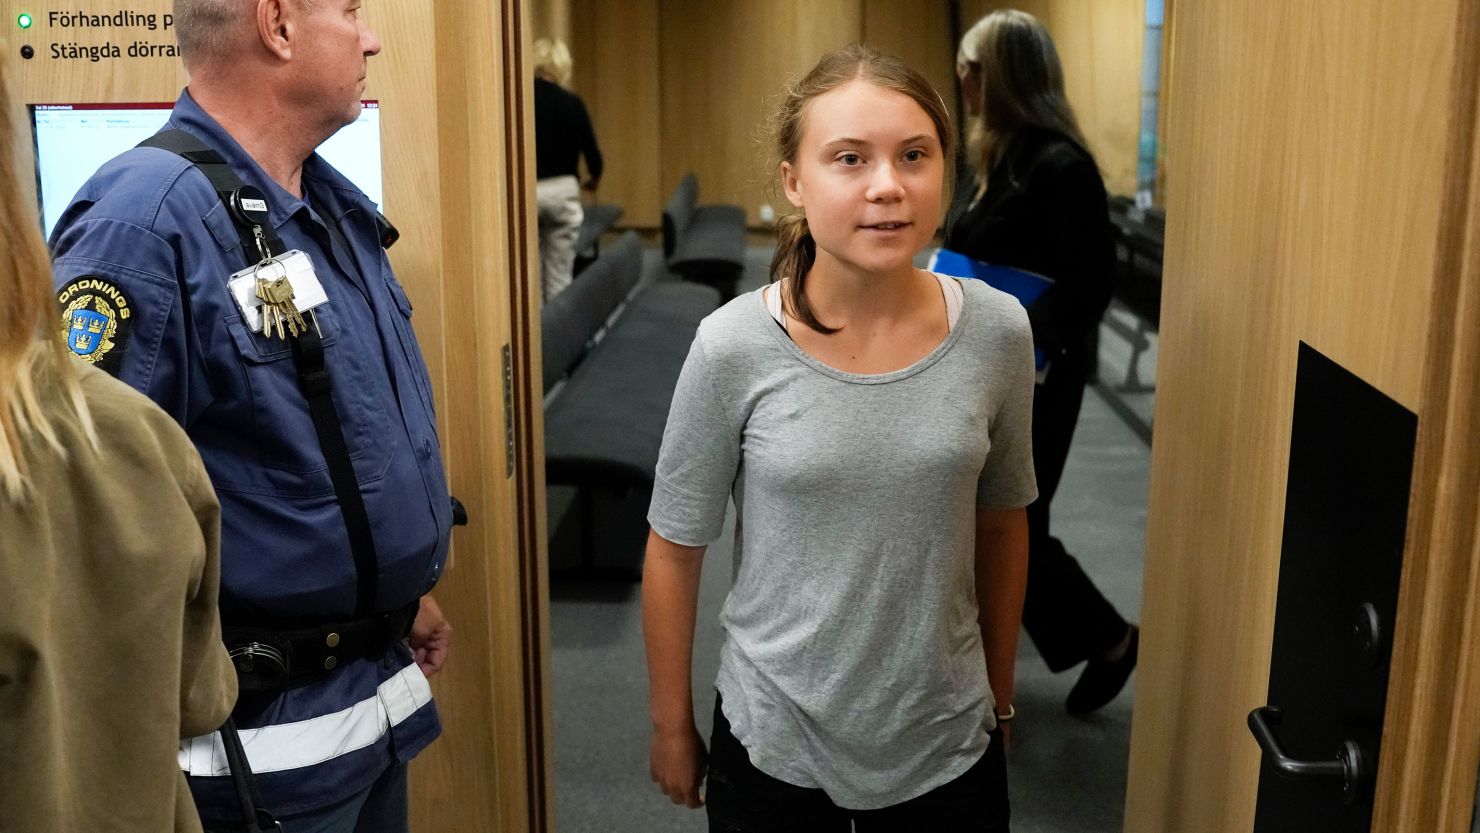 Greta Thunberg fined for disobeying police after climate protest CNN